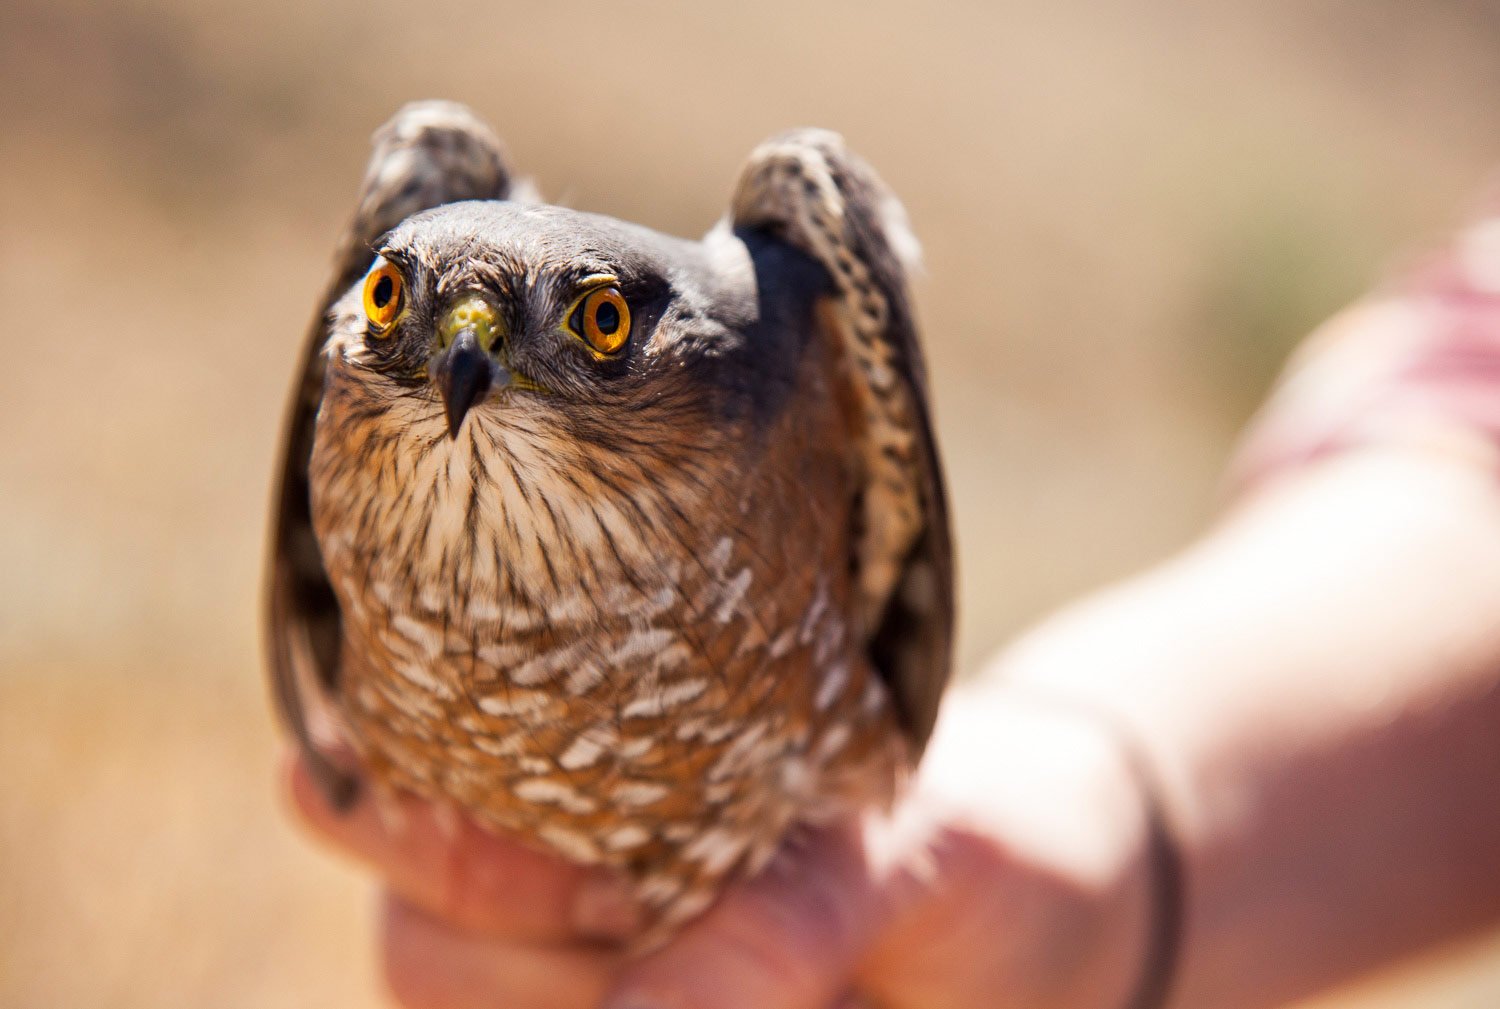 banded hawk stares into camera before release.jpg